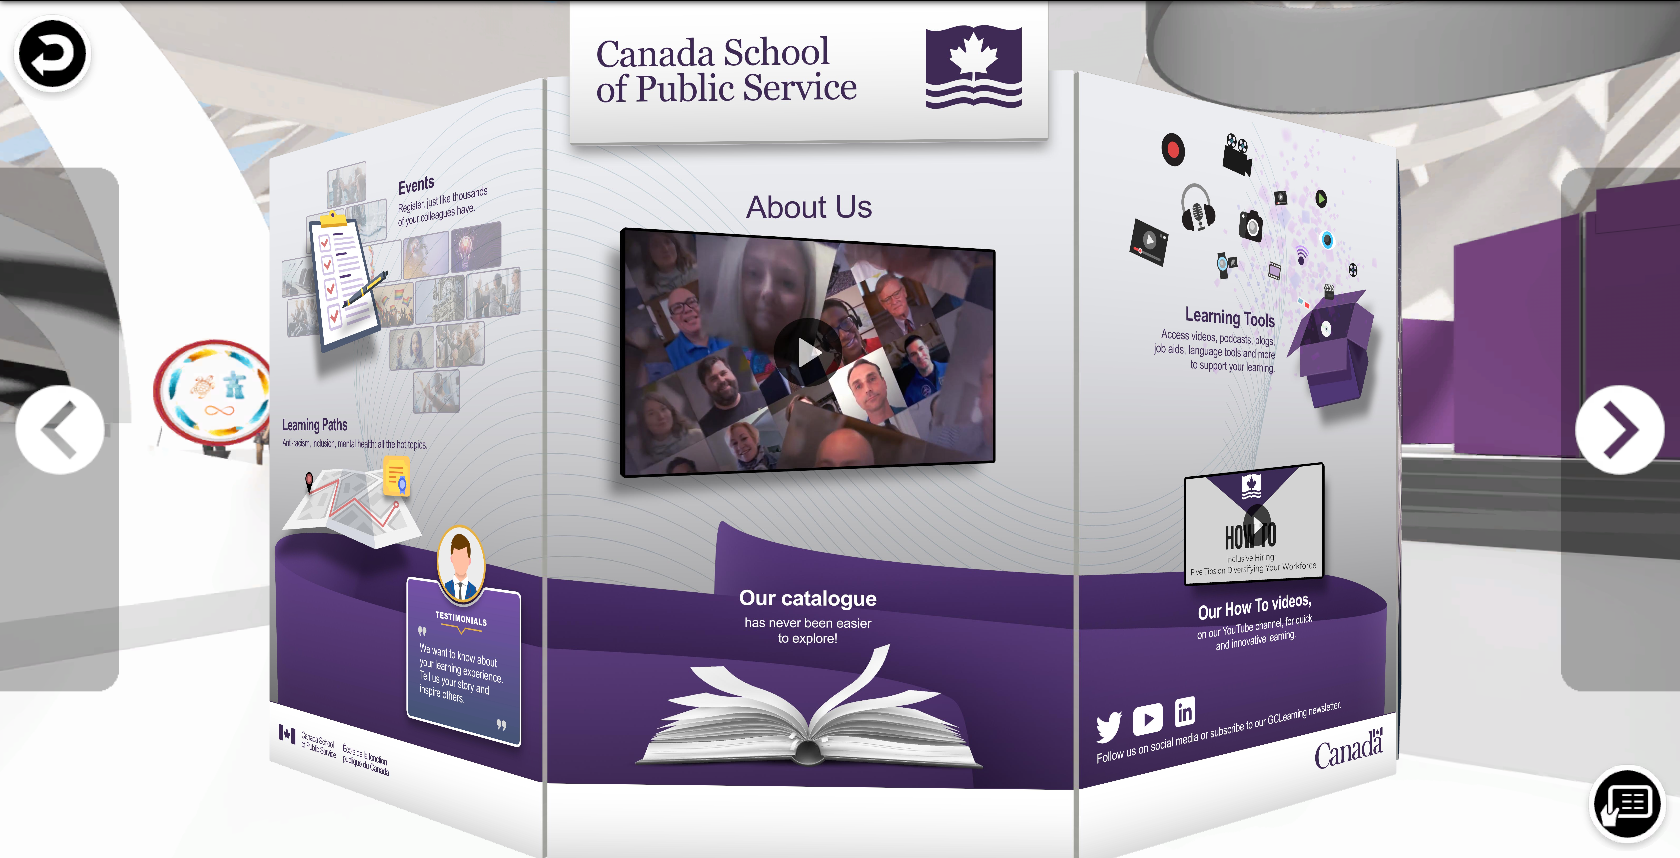 "Exemple of the CSPS 3-D kiosk"